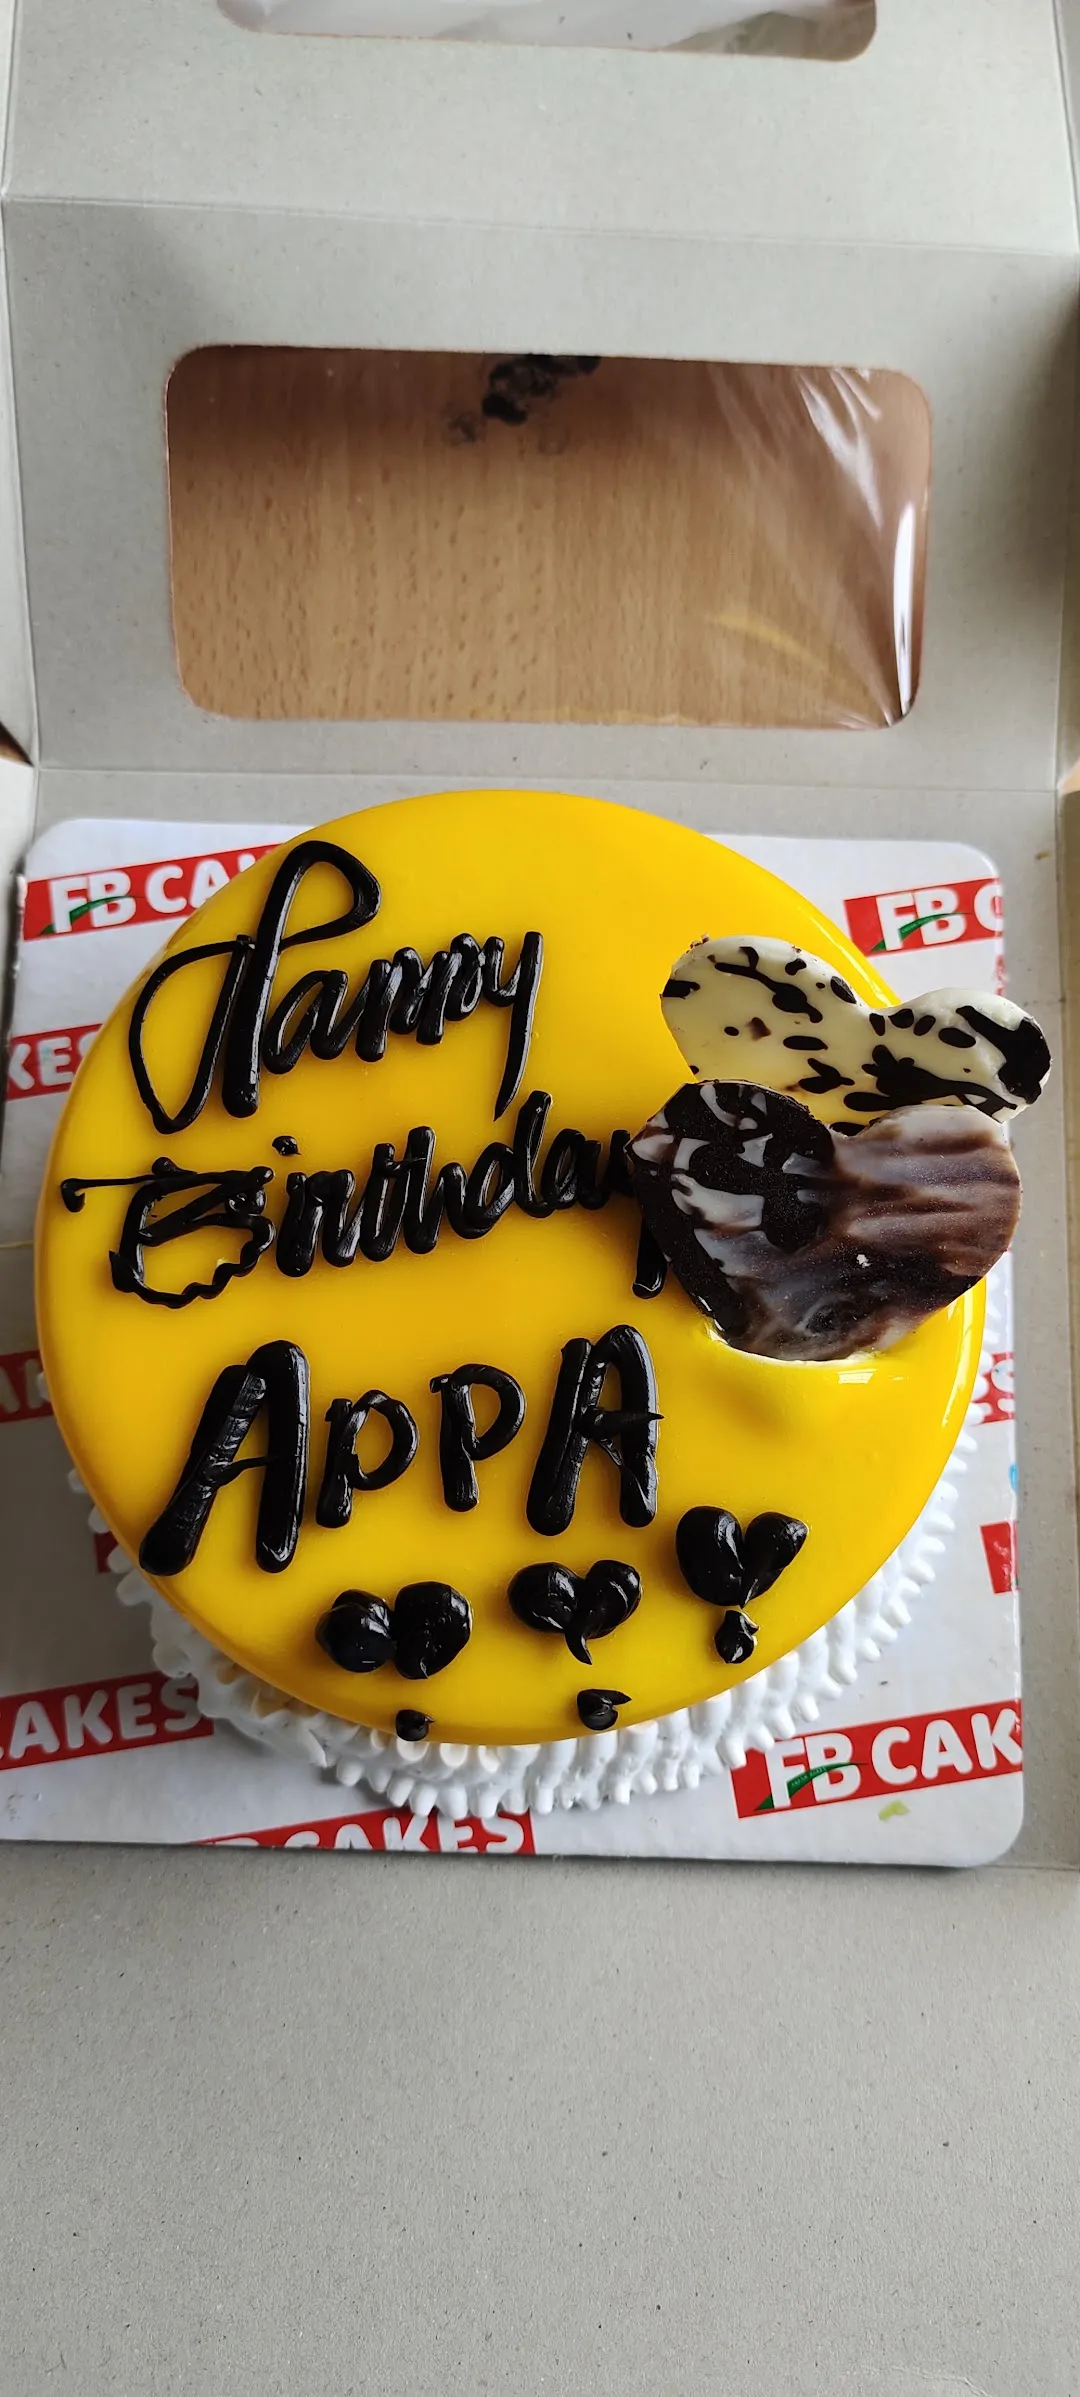 FB Cakes - Cake shop - Coimbatore - Tamil Nadu | Yappe.in